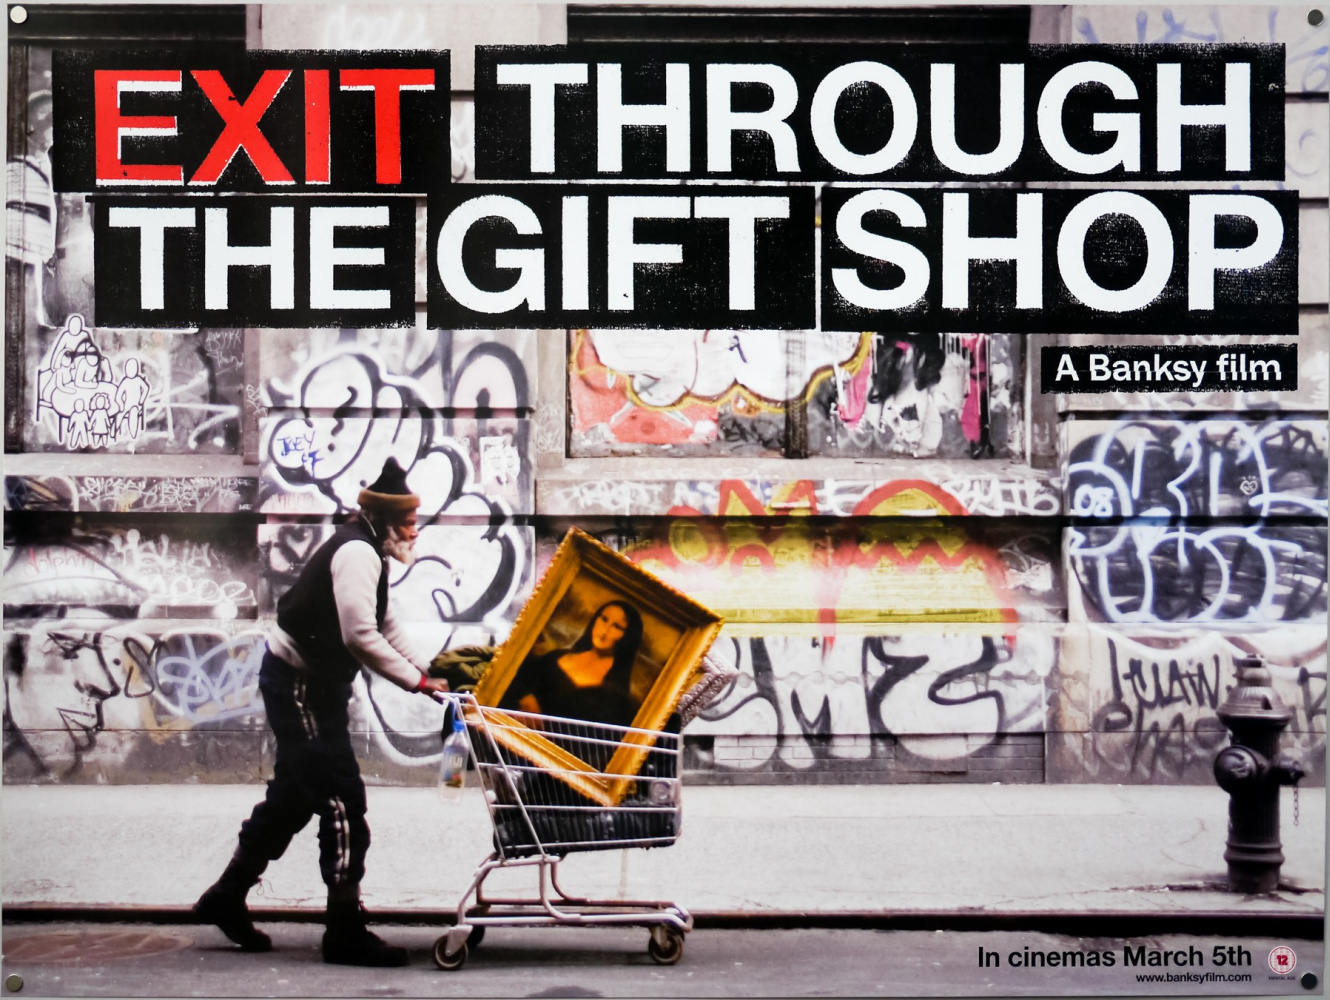 “Exit through the gift shop”: the endless joke of Banksy the Trickster